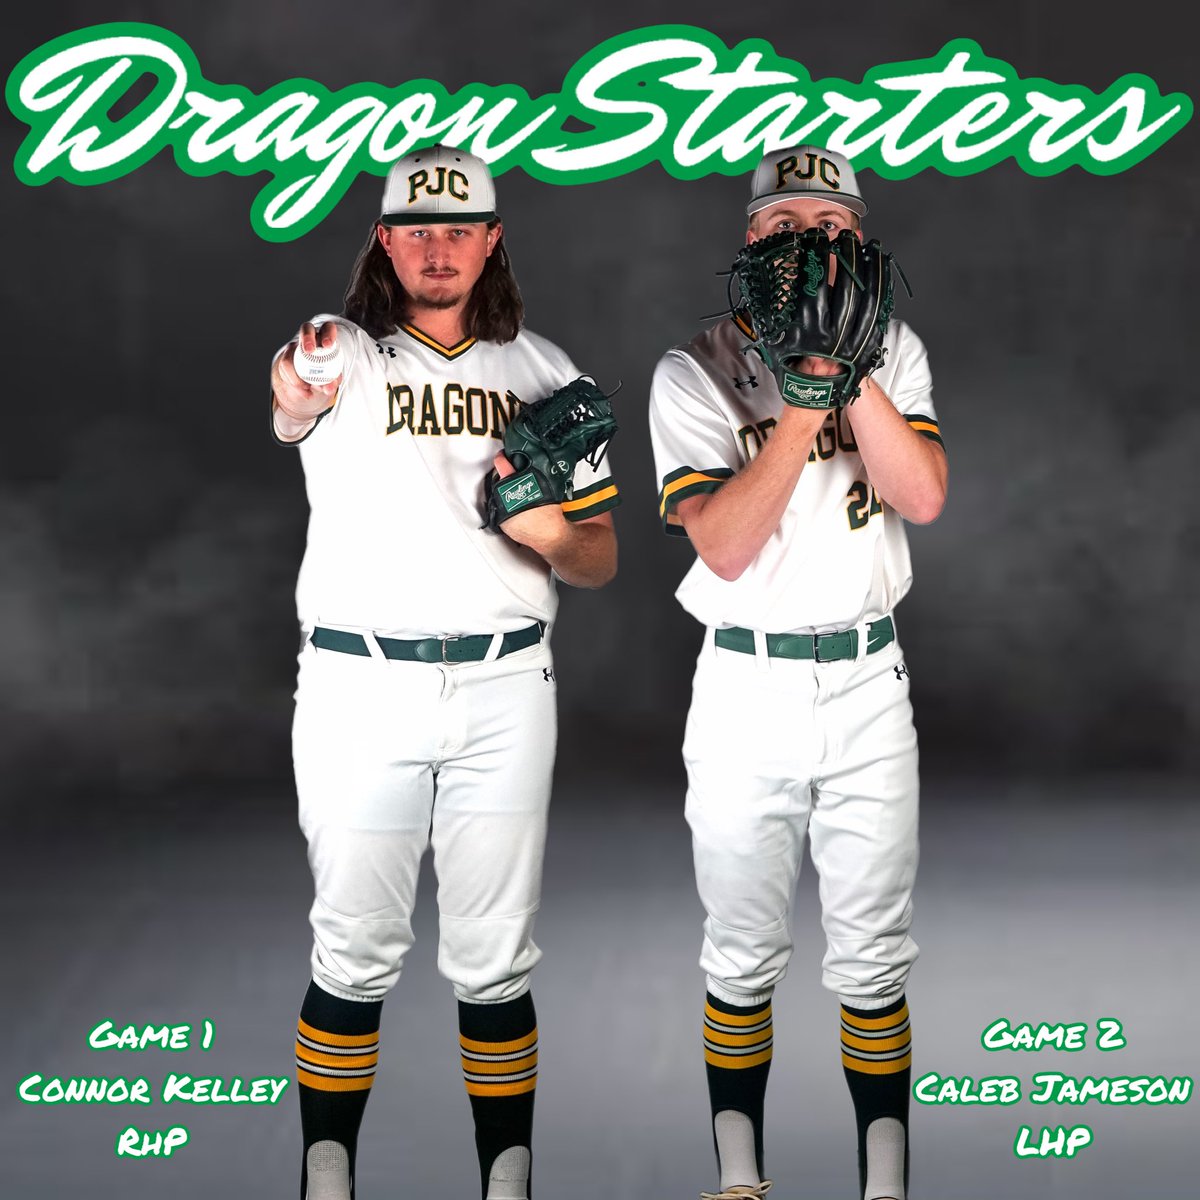 The Drags will send a pair of Freshmen to the mound today!

Game 1: @ckelley0212 
Game 2: @CalebCJ22 

#PJCbaseball #BuiltDifferent